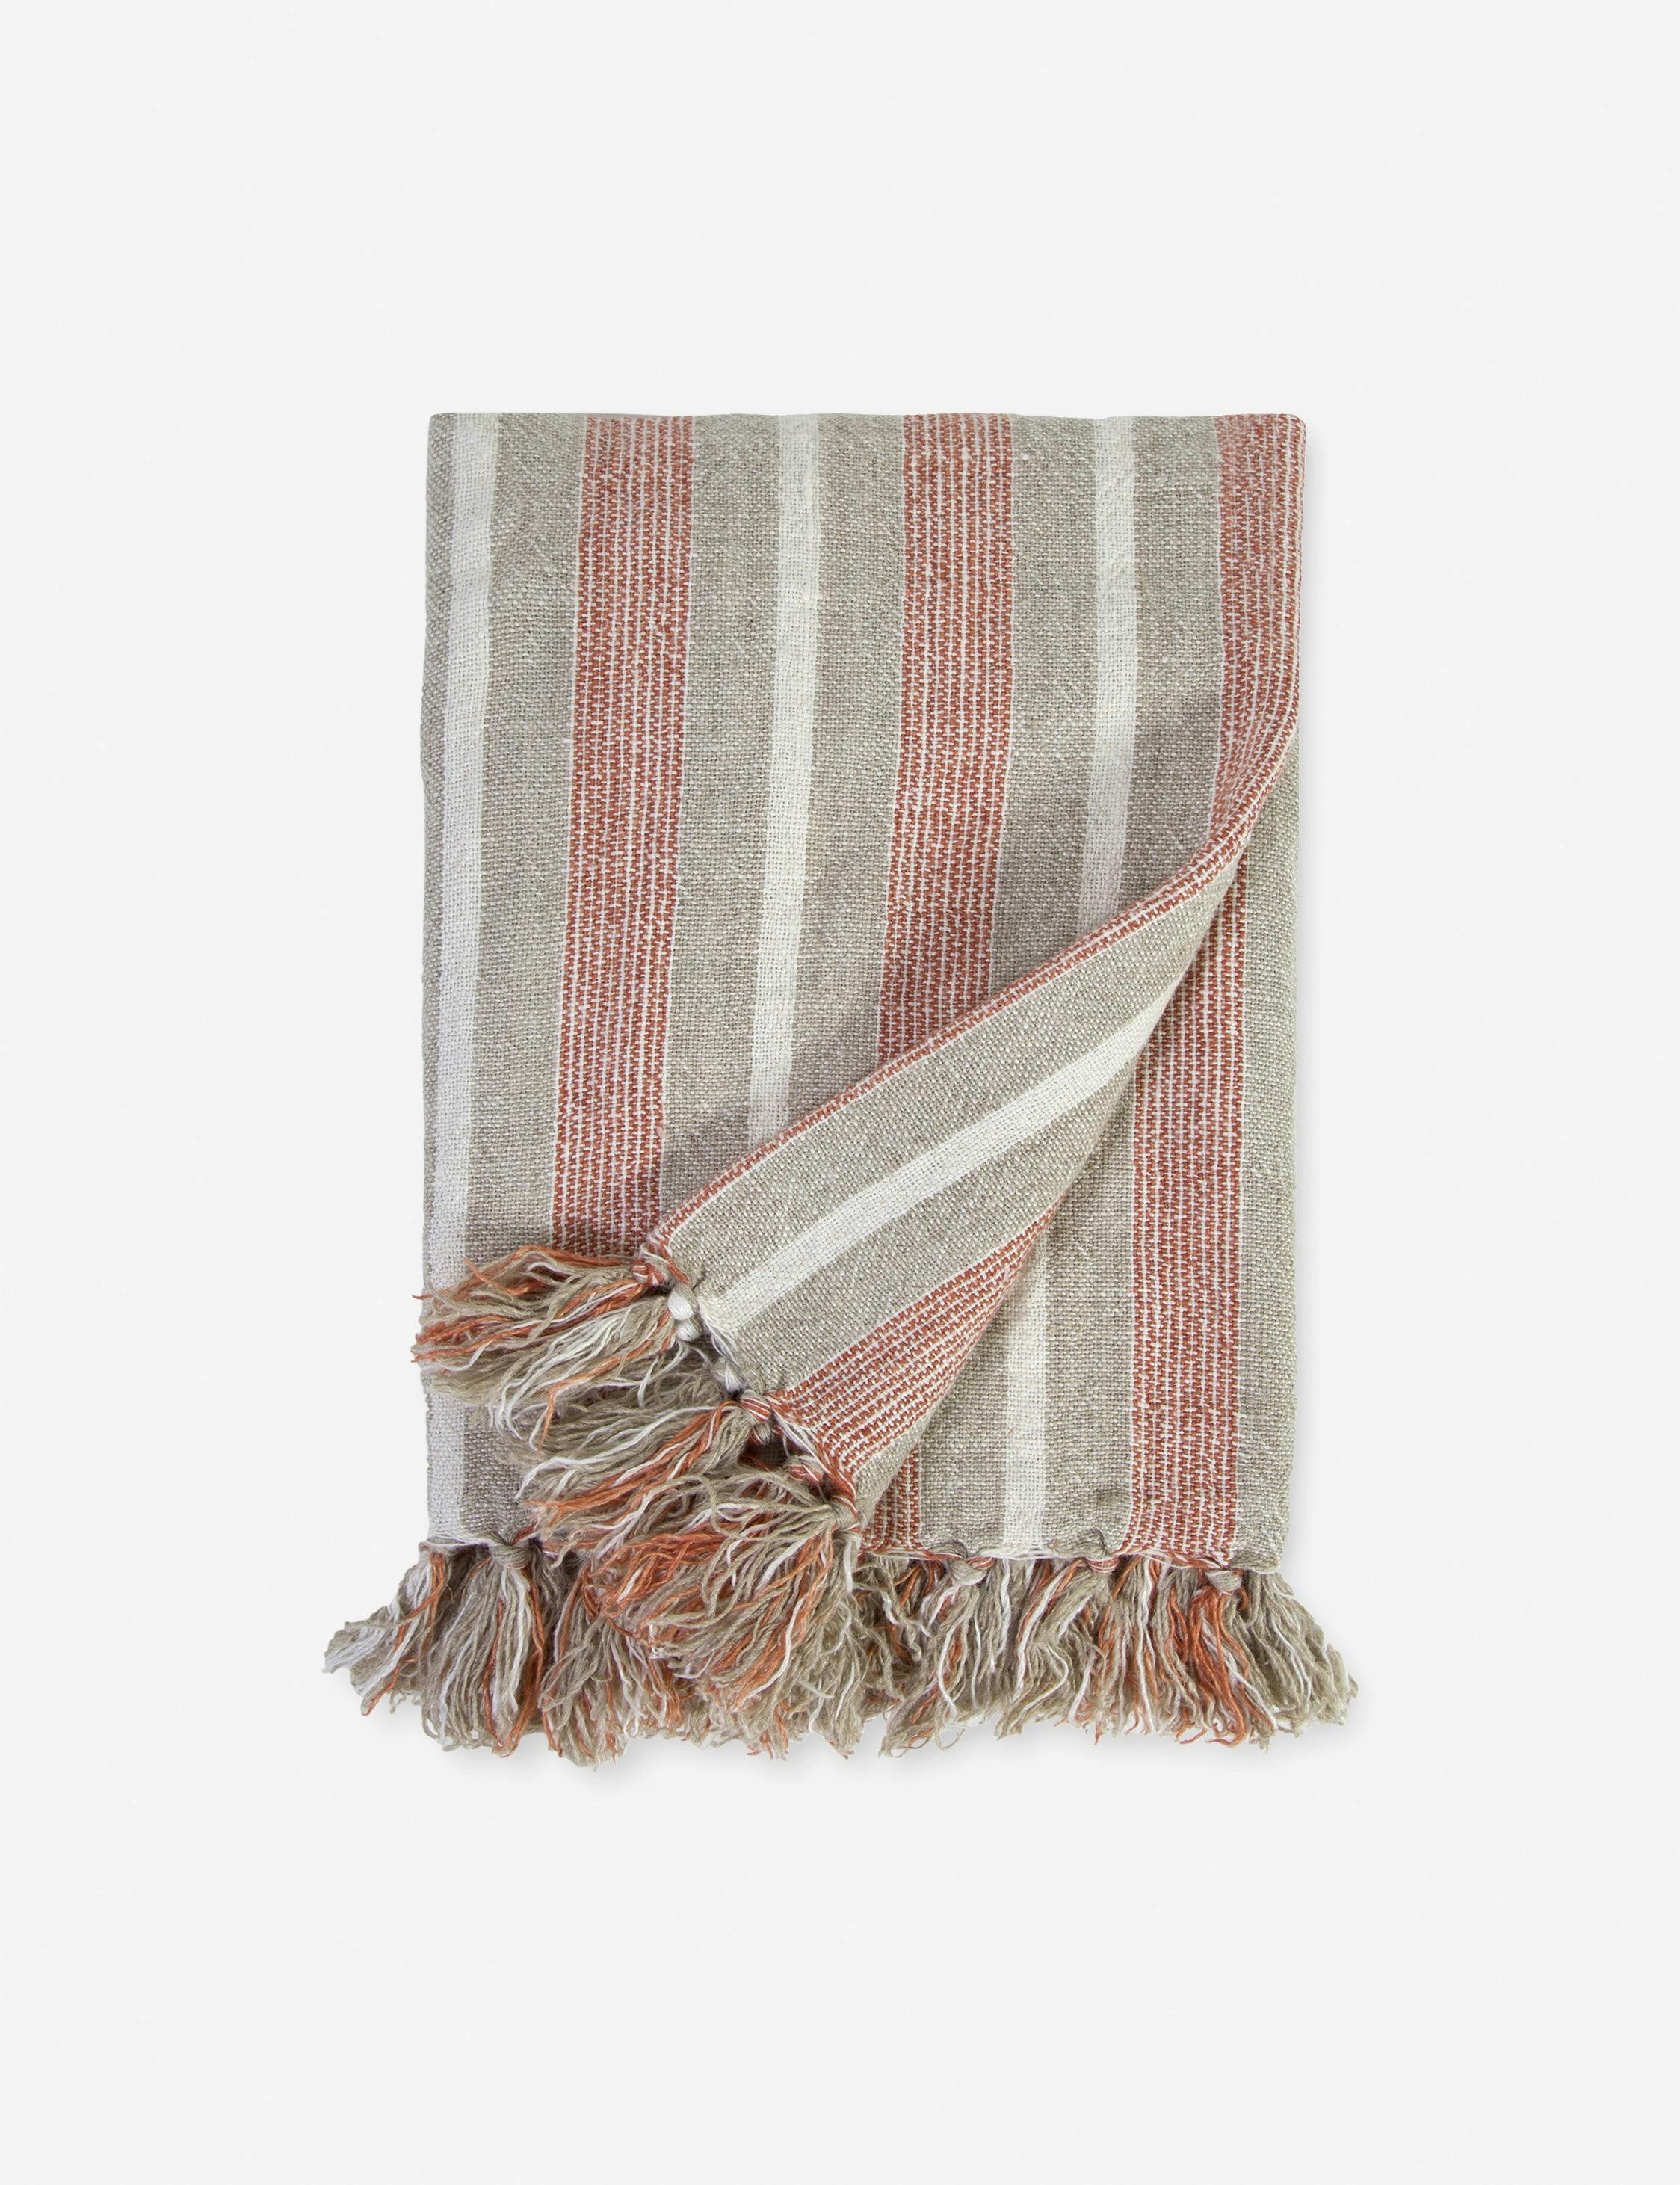 Montecito Terra Cotta and Natural Striped 100% Linen Oversized Throw with Tassels